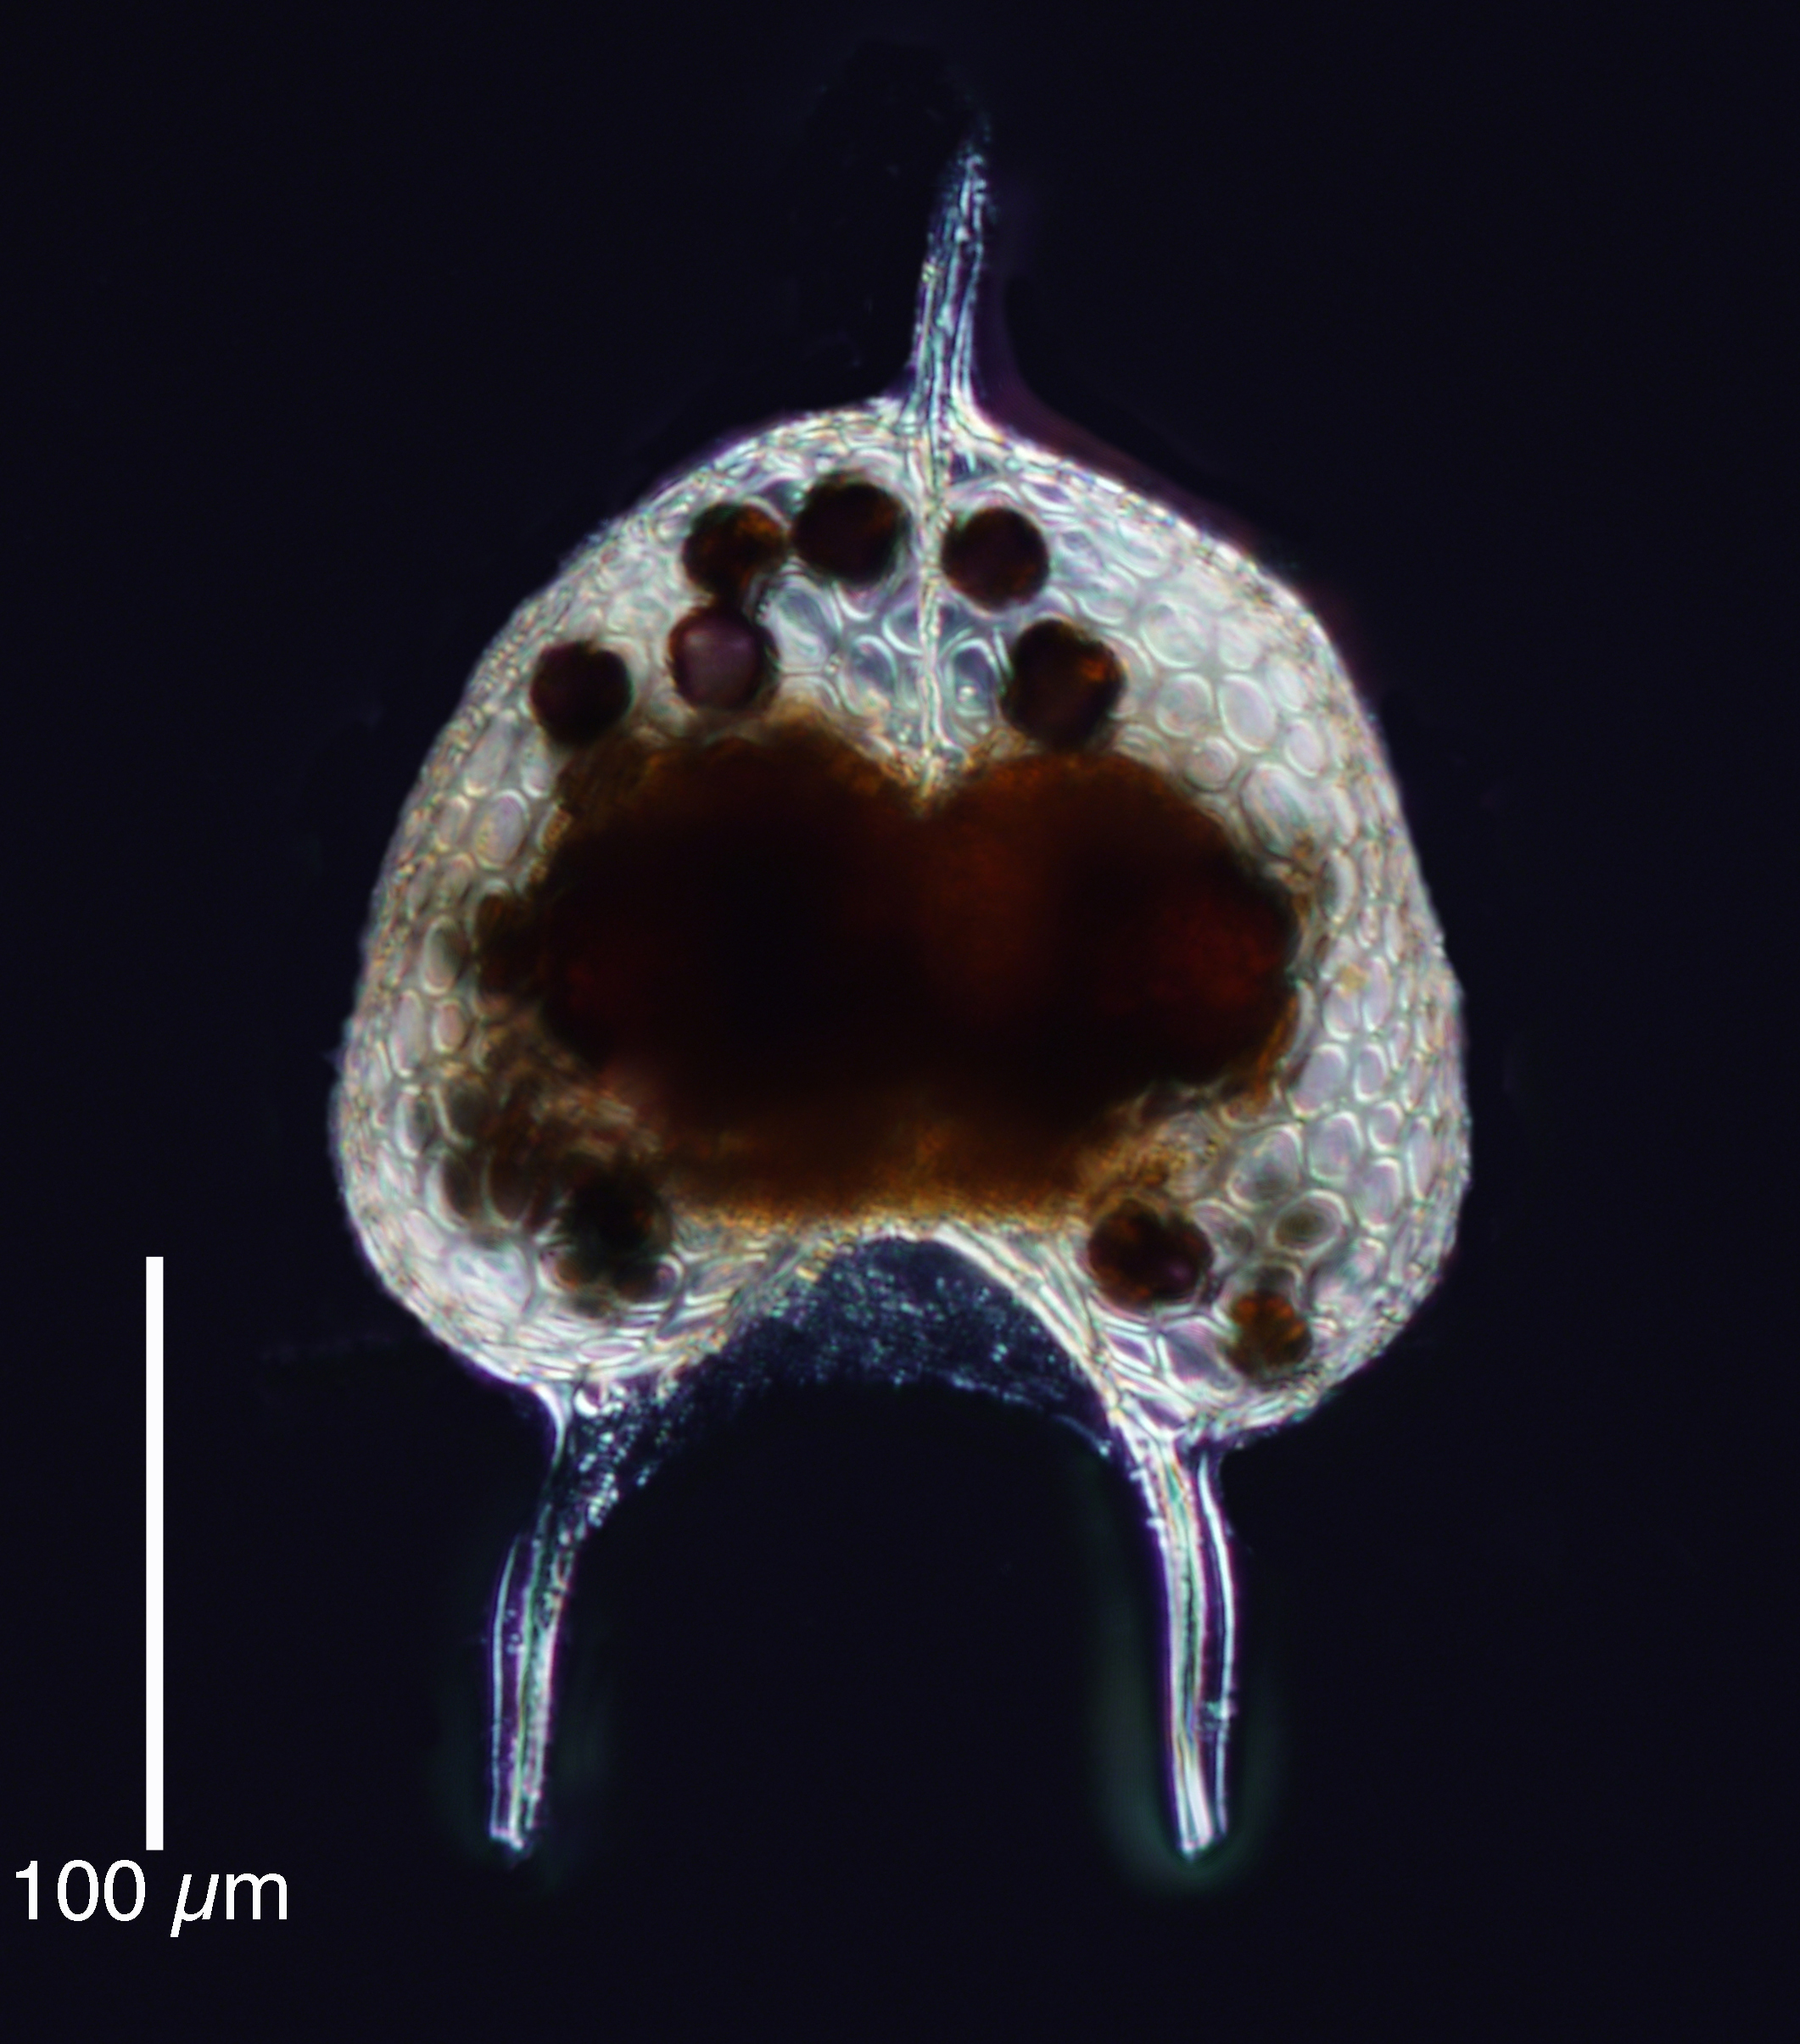 Tholospyris sp. from the Bay of Villefranche in September 2015